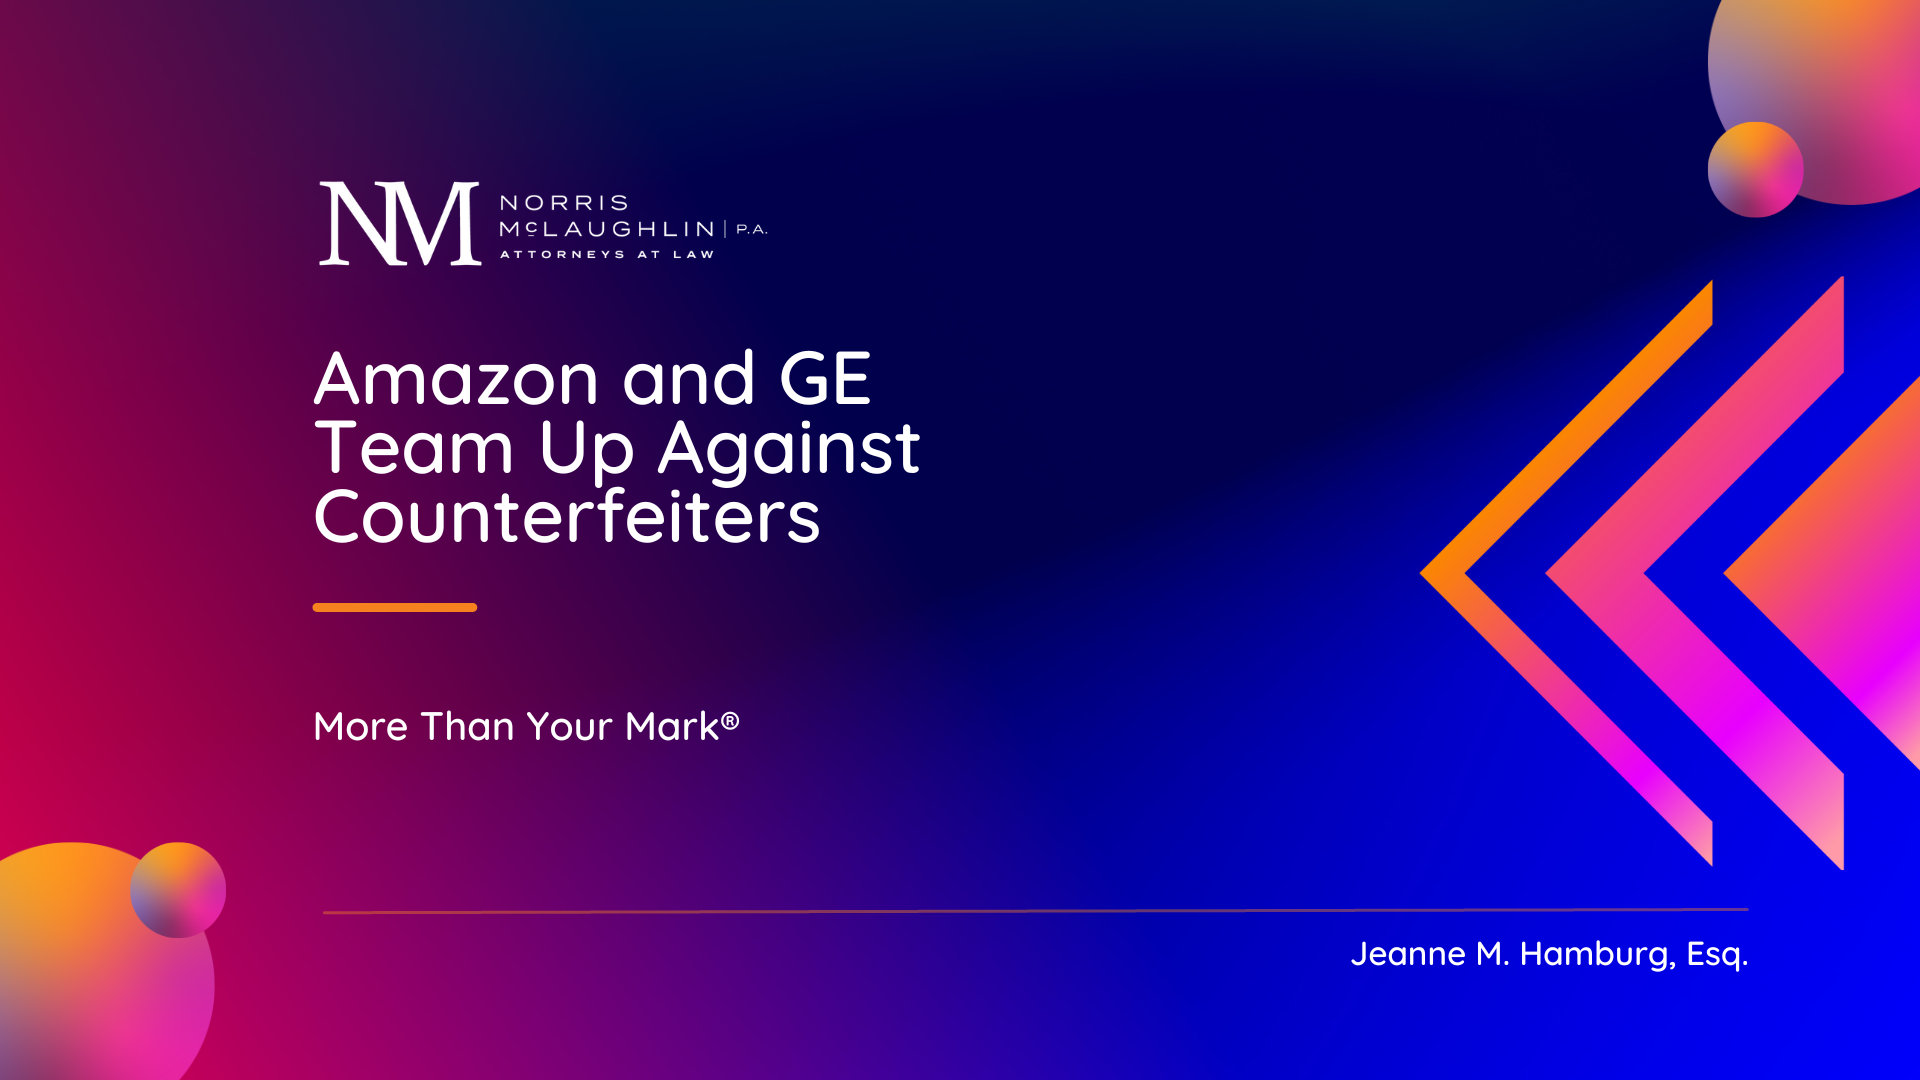 Amazon and GE Team Up Against Counterfeiters